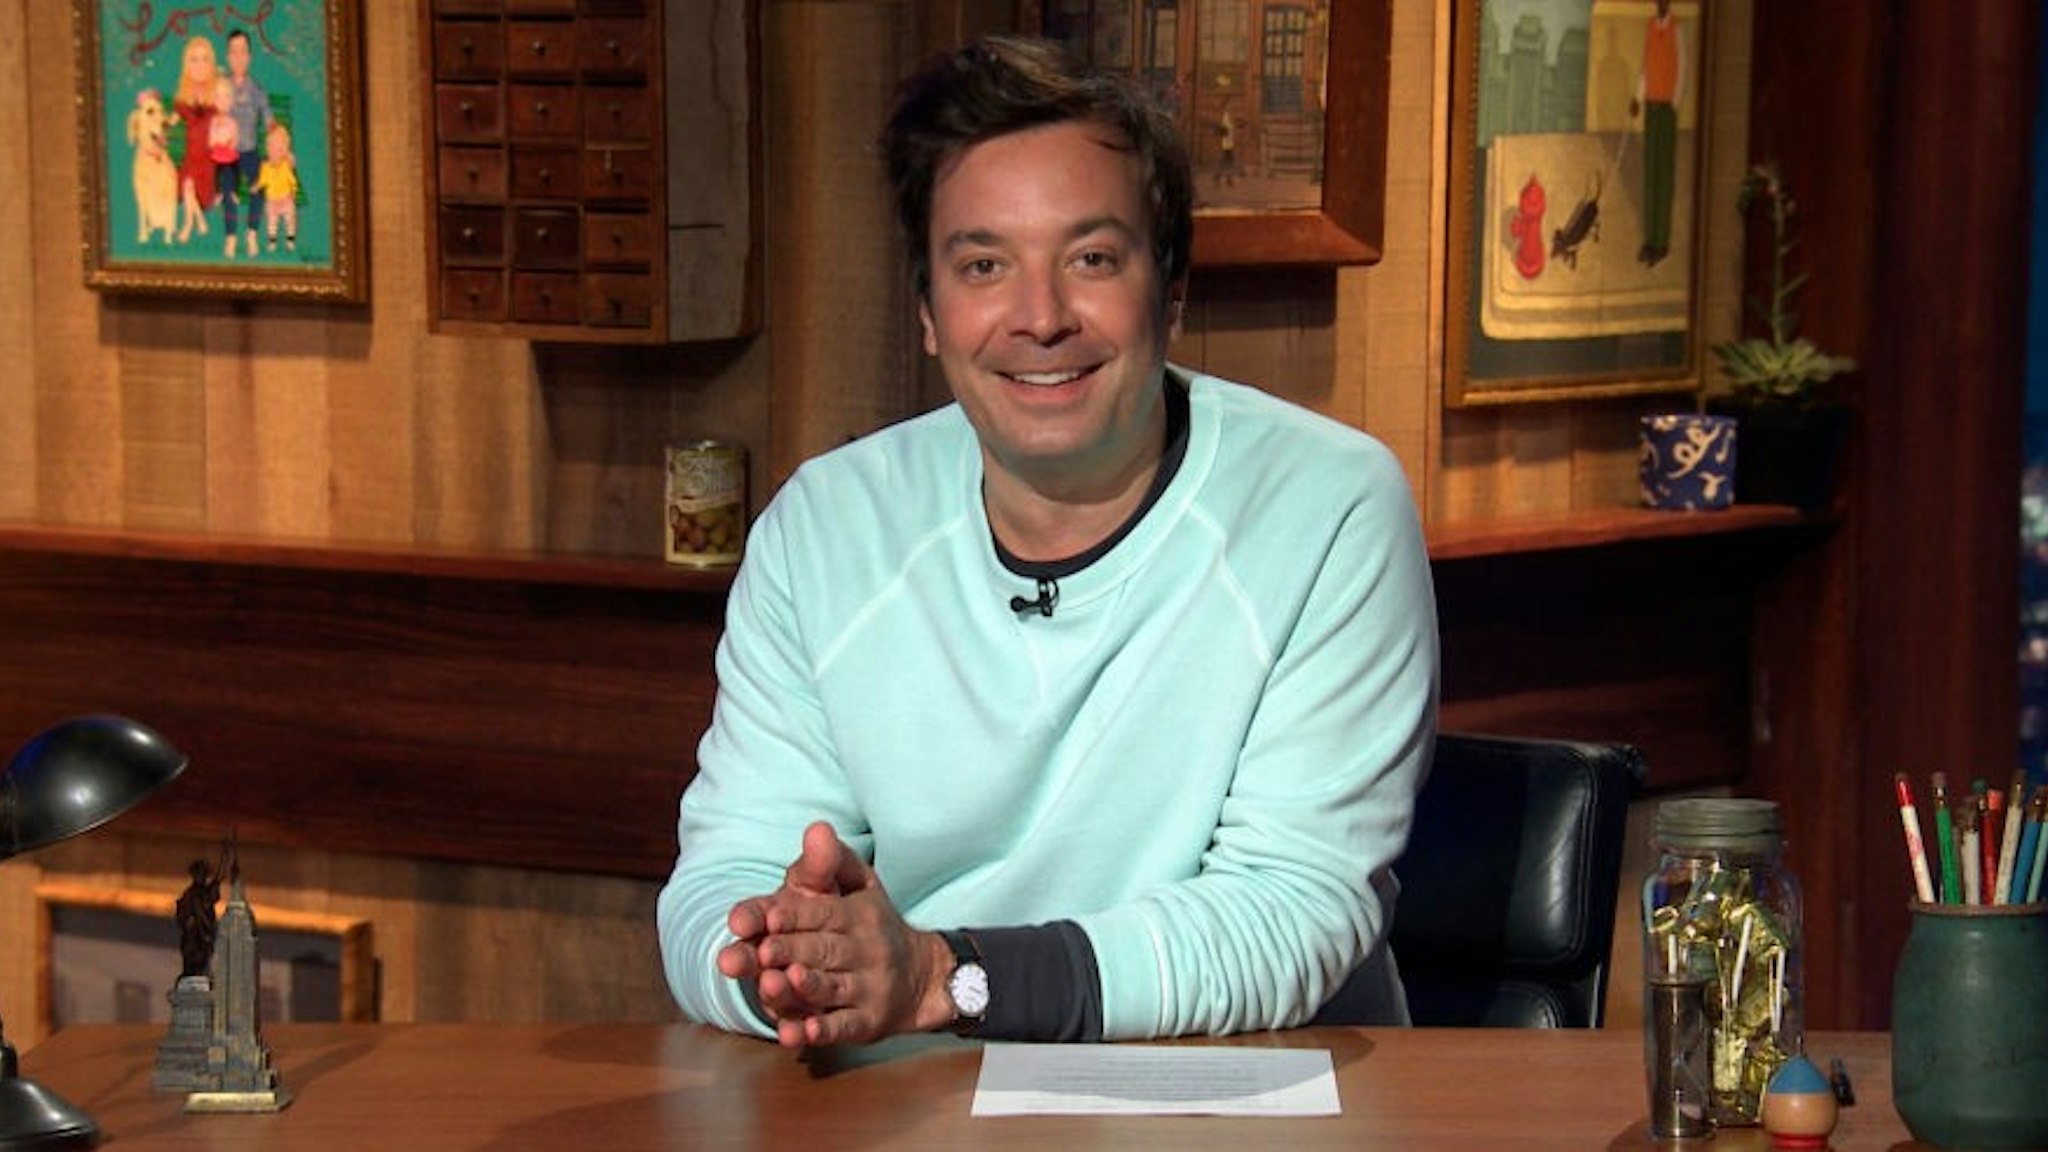 THE TONIGHT SHOW STARRING JIMMY FALLON -- Episode 1292A -- Pictured in this screengrab: Host Jimmy Fallon arrives at his desk on July 20, 2020 -- (Photo by: